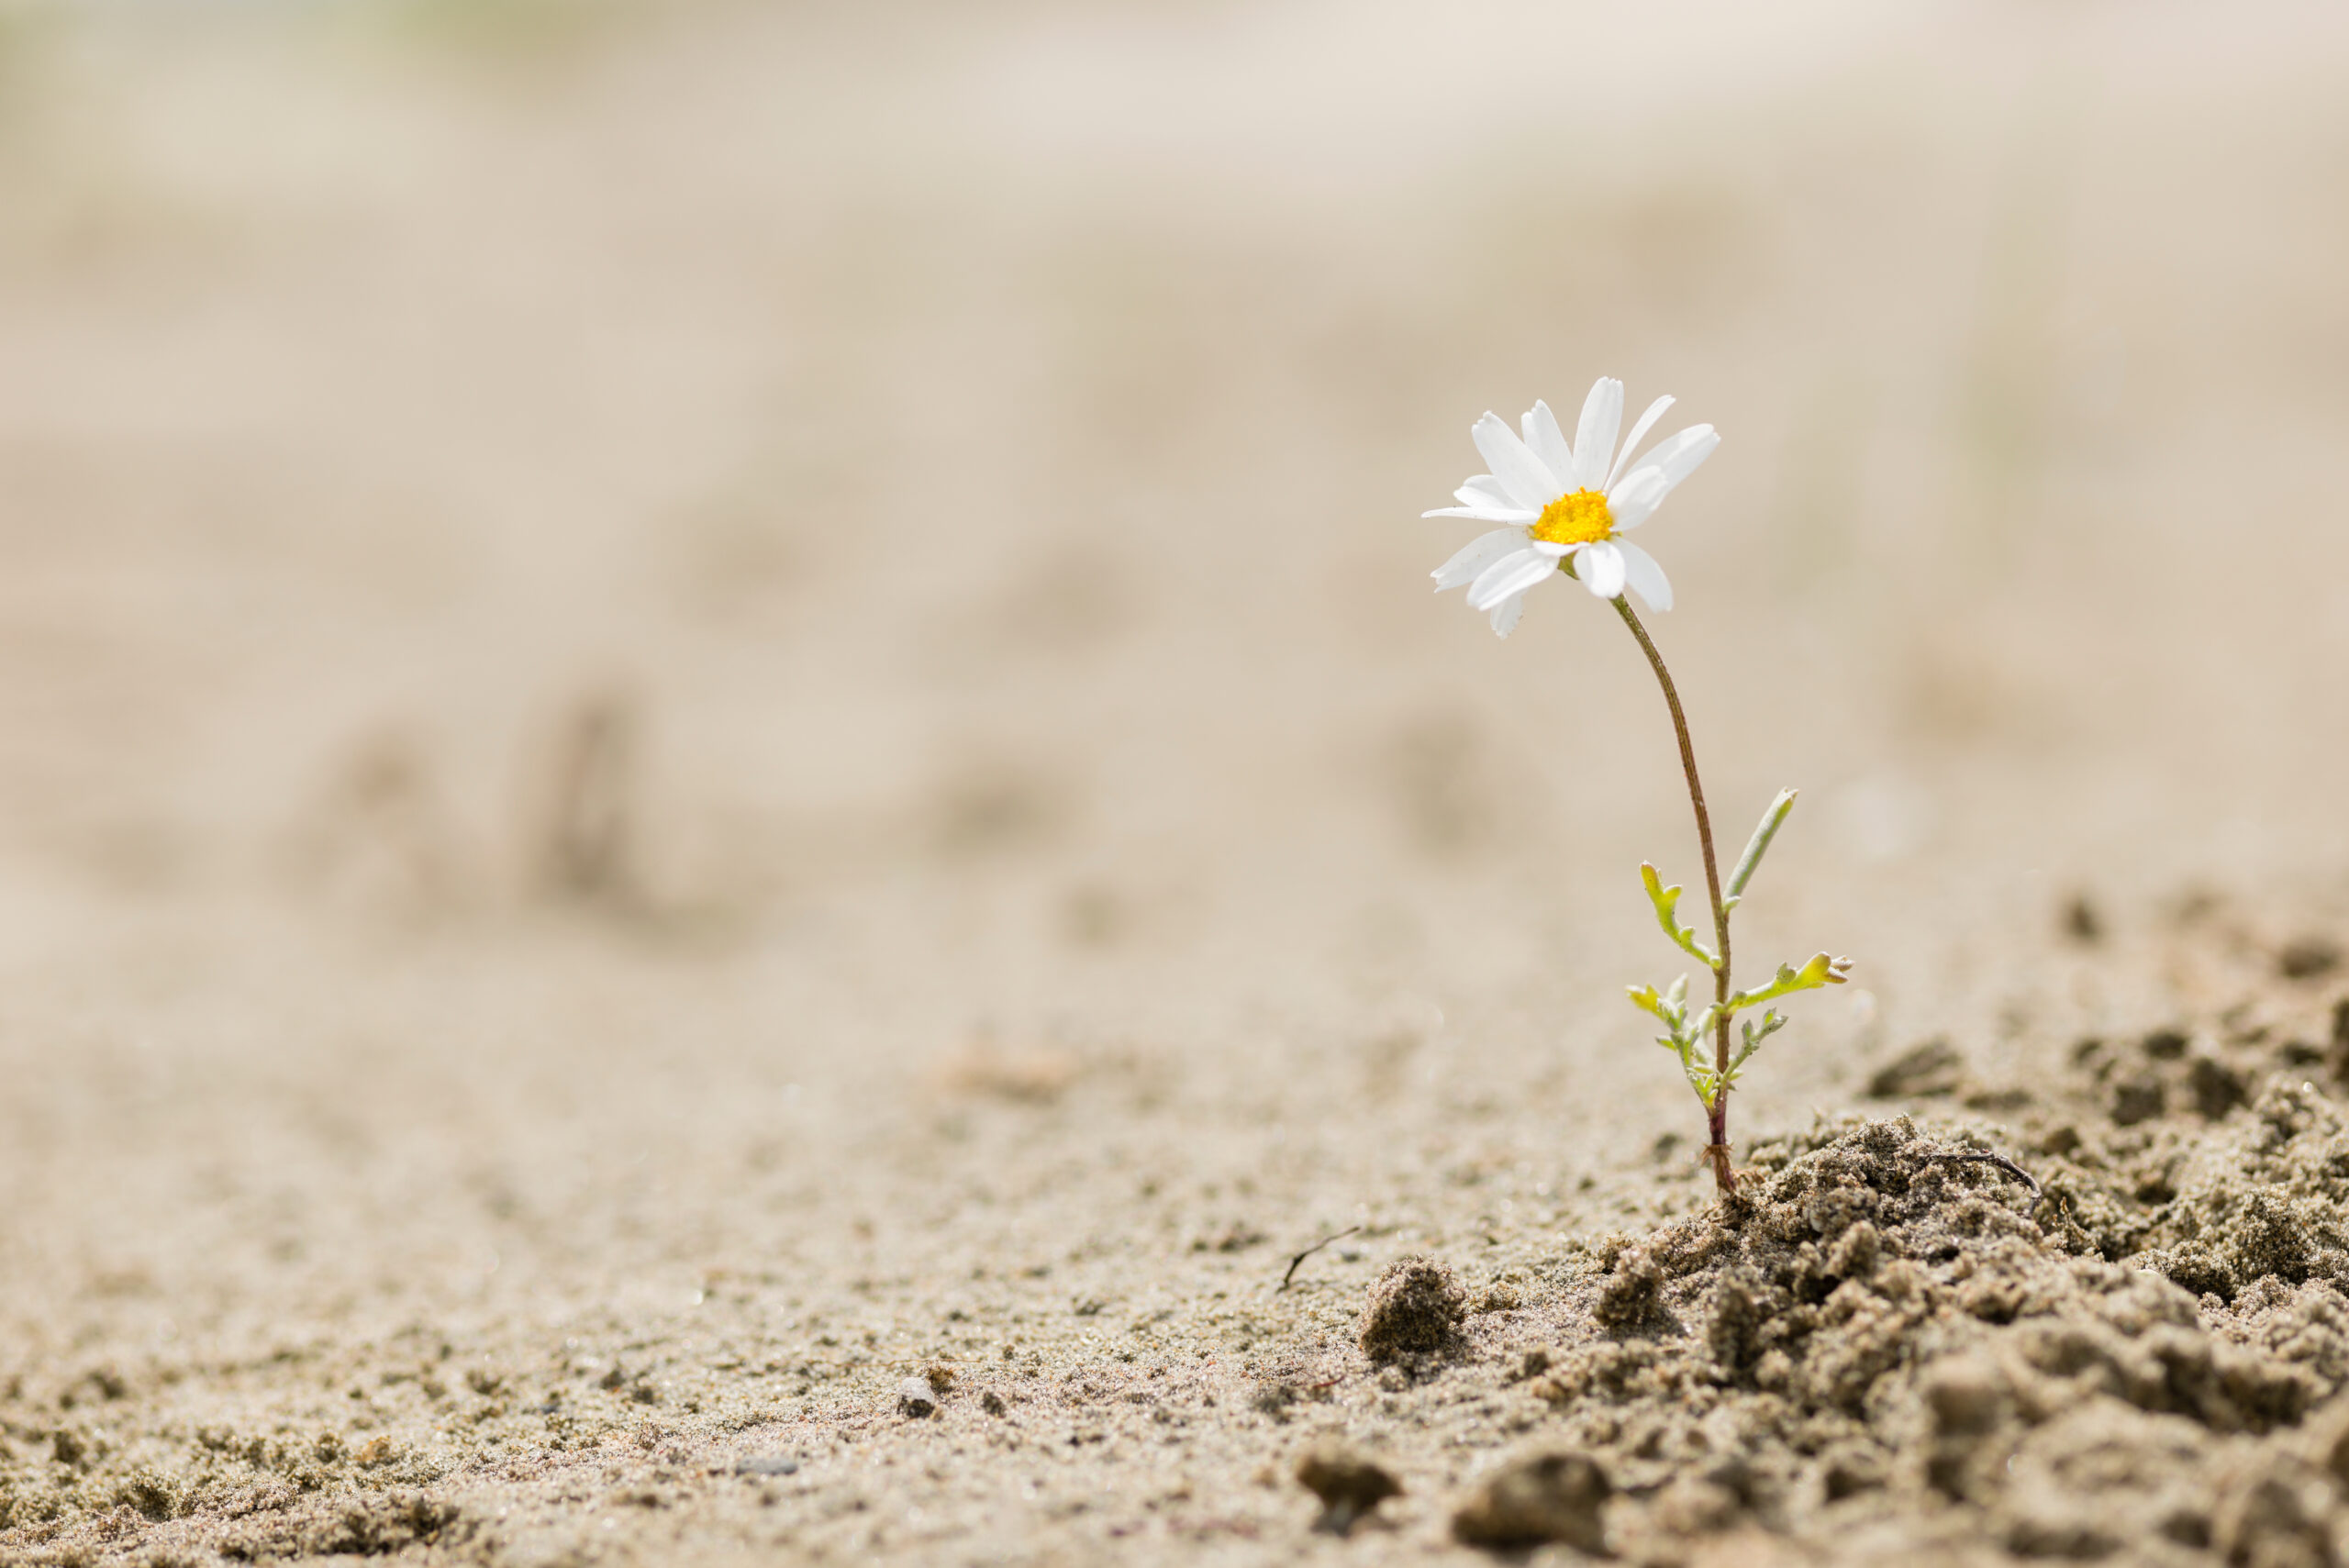 Daisy flower blooming on a sand desert displaying resilience.